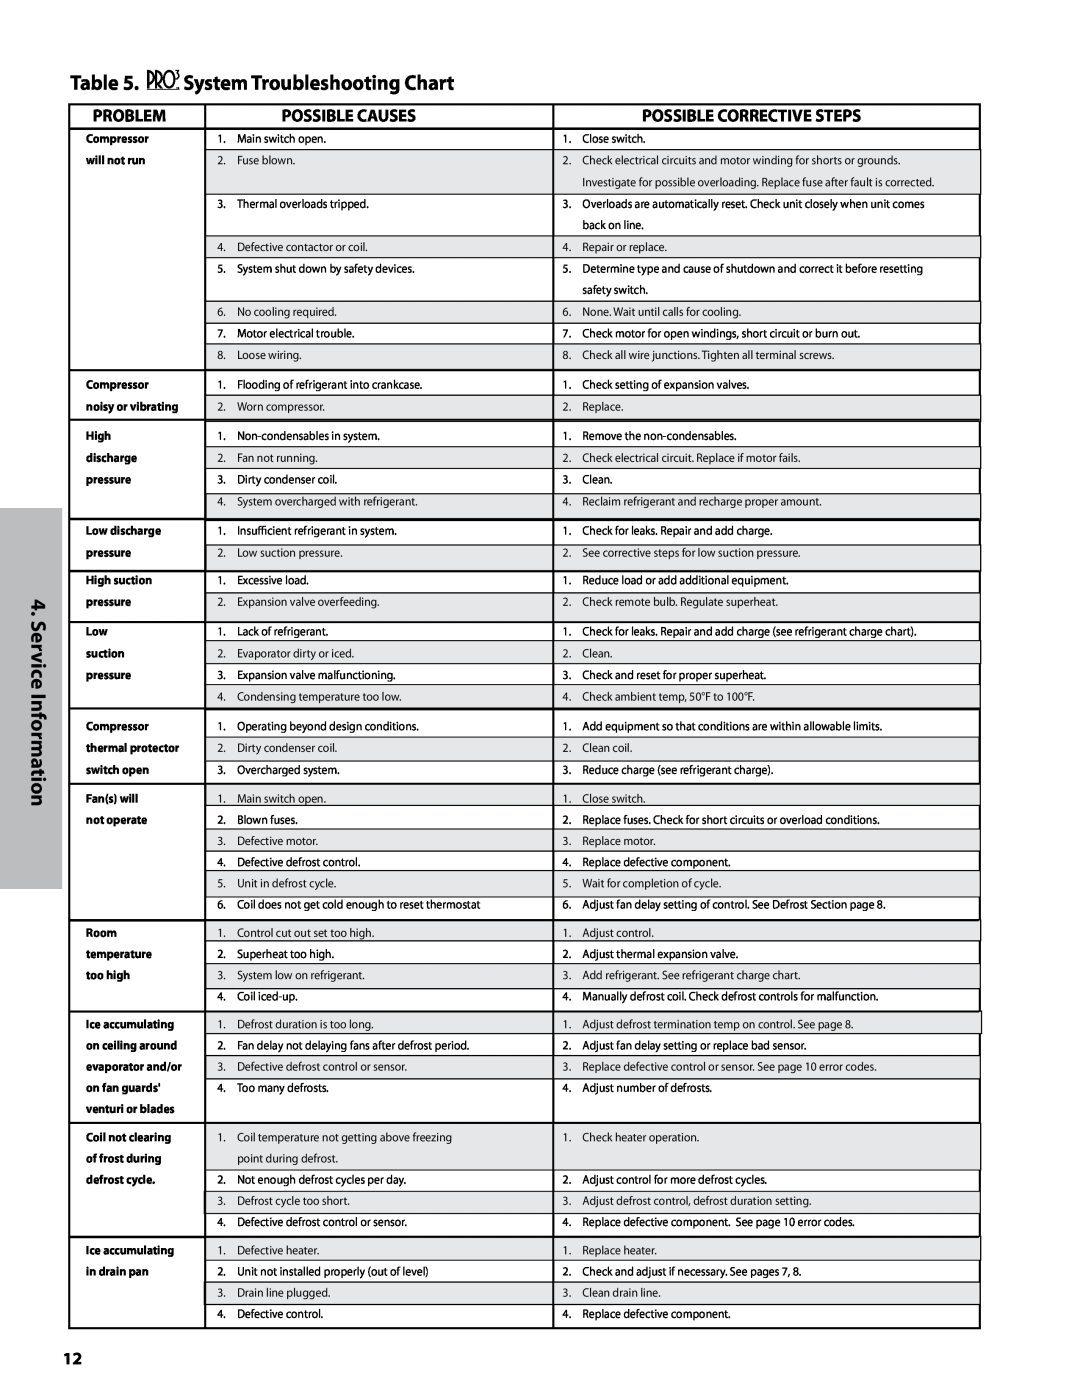 Heatcraft Refrigeration Products H-IM-82B System Troubleshooting Chart, Problem, Possible Causes 